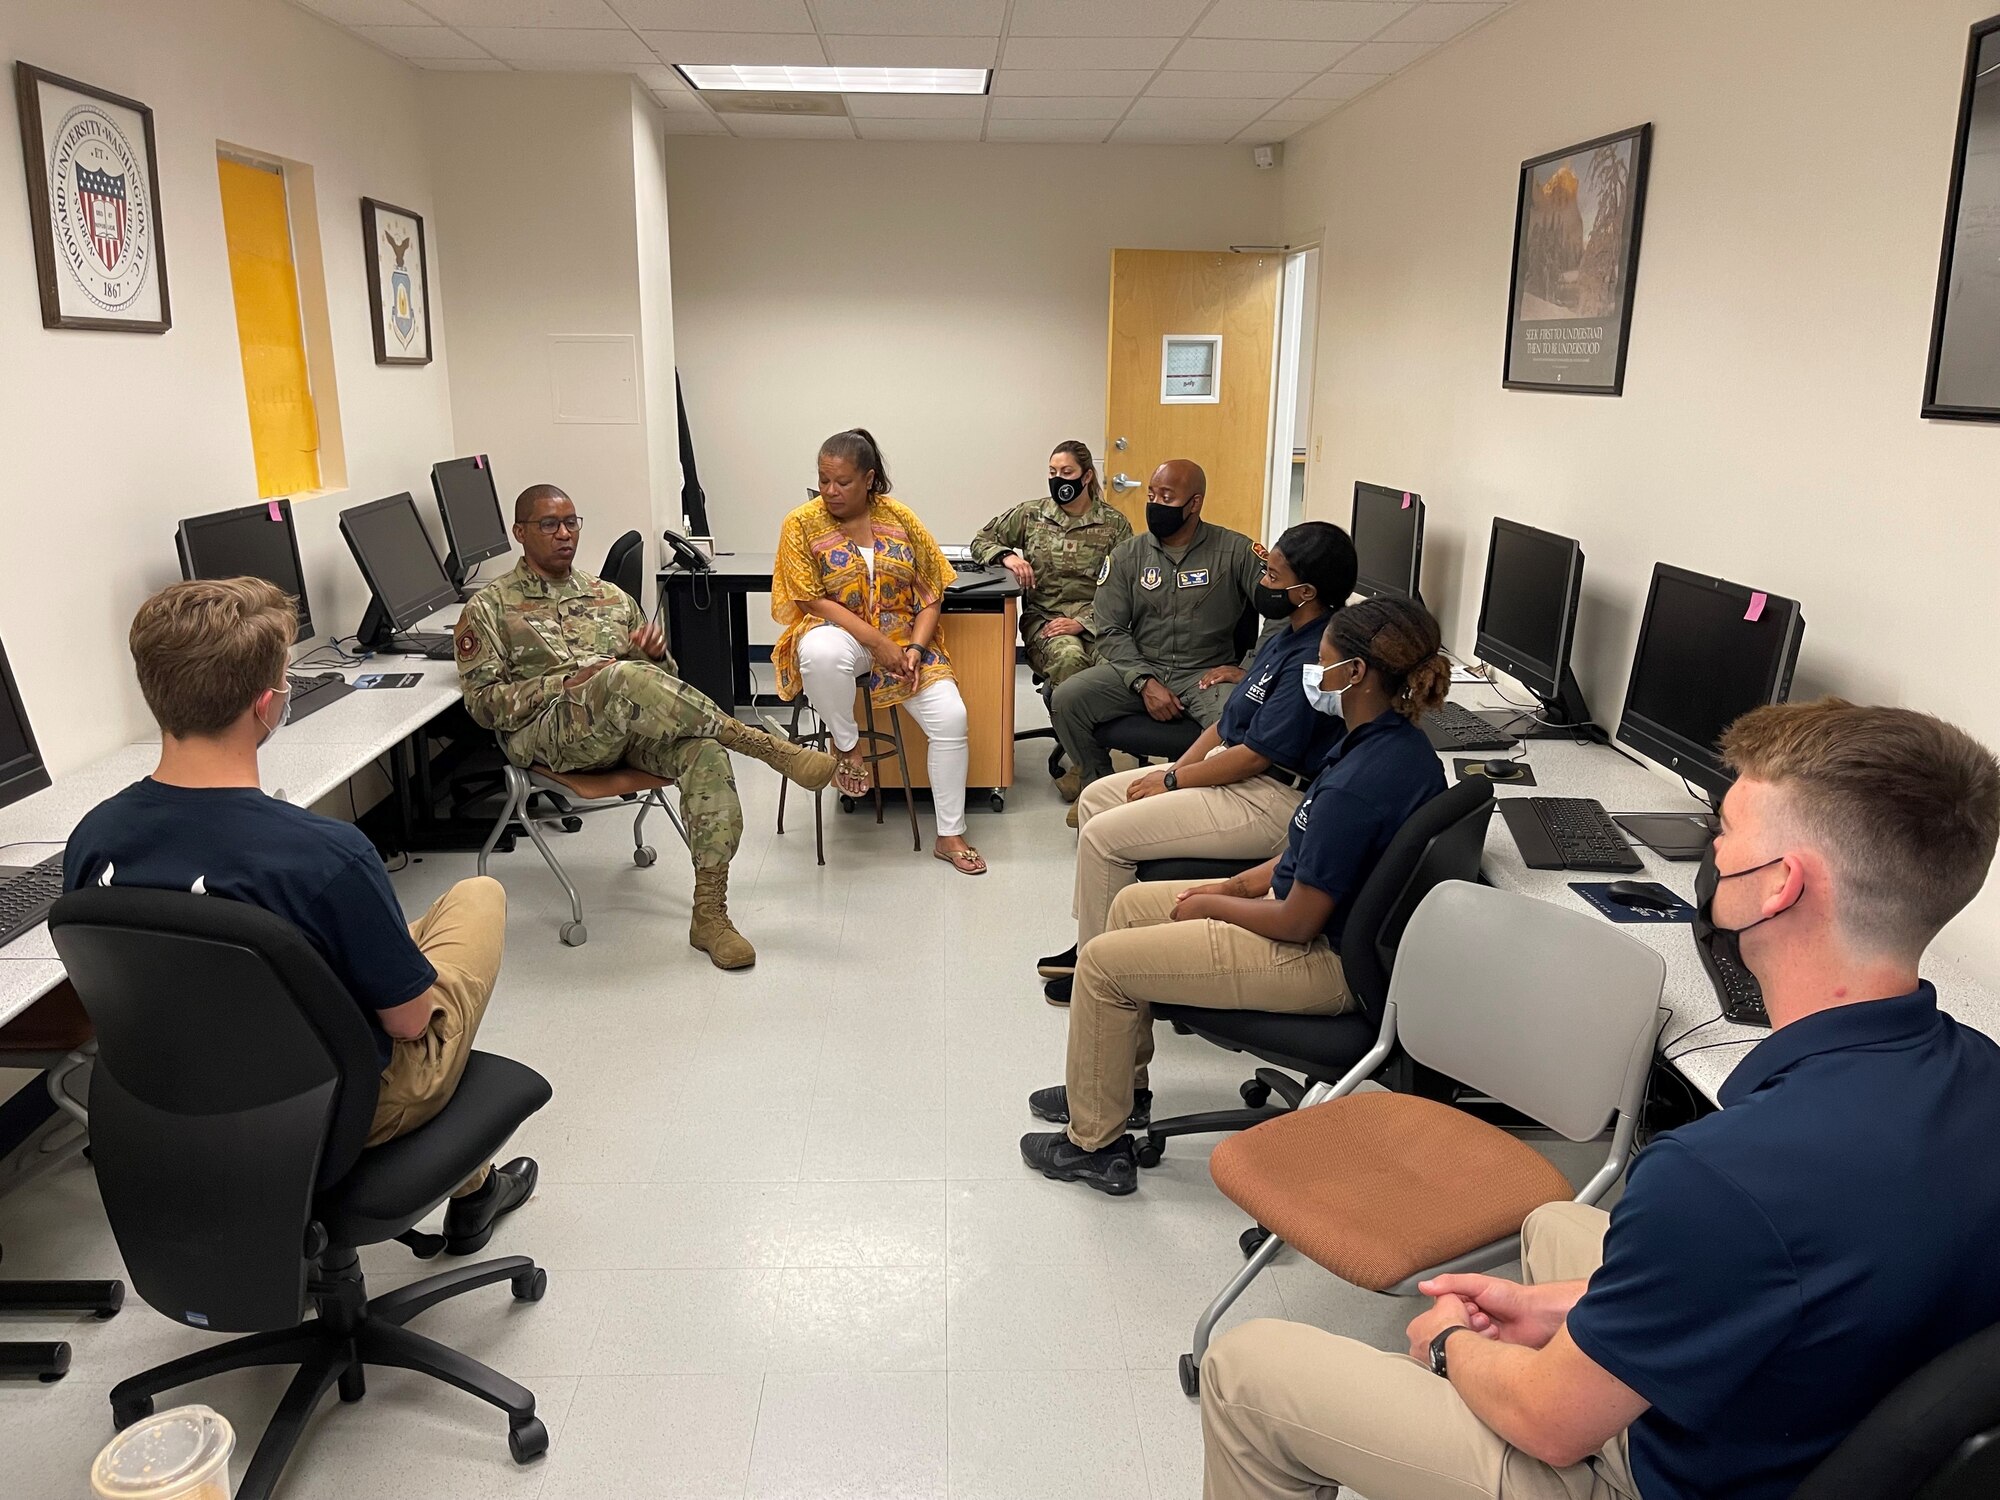 As part of the Department of the Air Force’s GO Inspire Program, Maj Gen Randall Reed, Commander, Third Air Force, and his wife Lynn, visited approximately 40 Air Force Reserve Officer Training Corps cadets at Howard University’s Detachment 130 in Washington D.C.